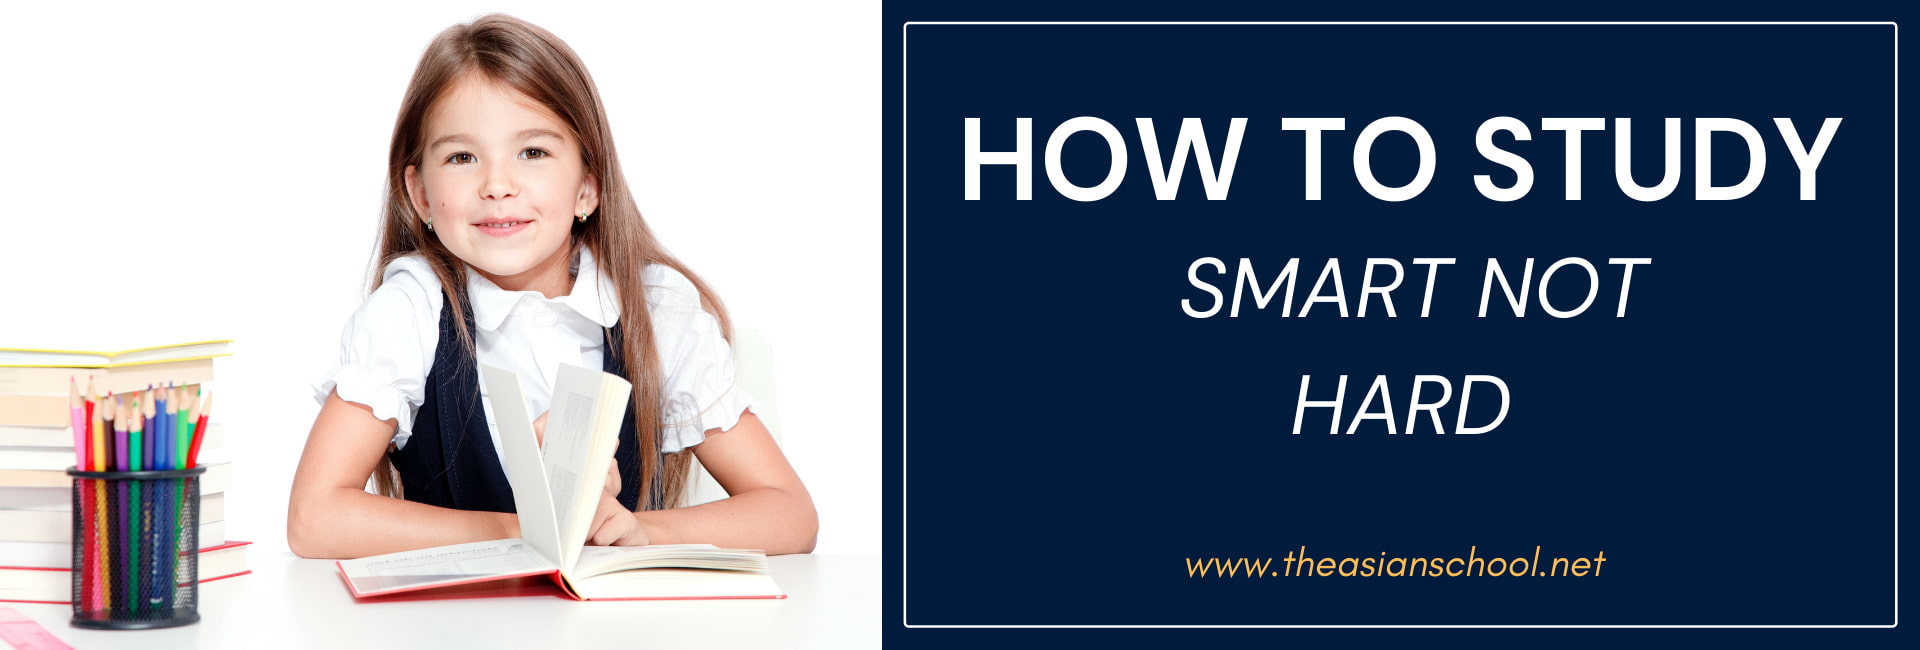 How To Study Smart Not Hard